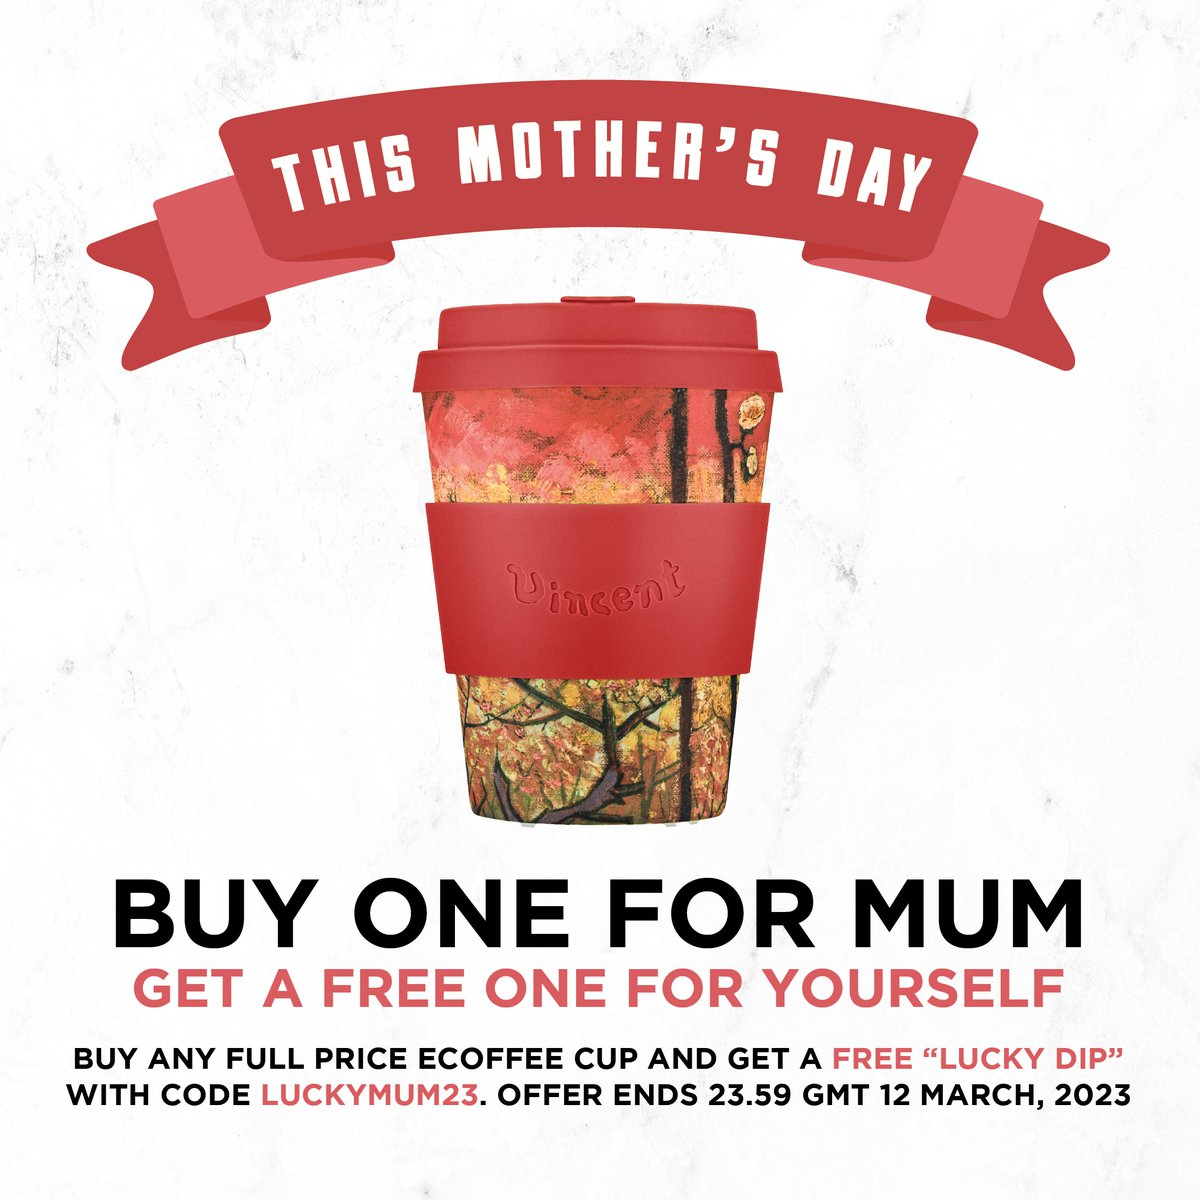 Buy any full price Ecoffee Cup for your Mum and get a 'Lucky Dip' free this #MothersDay with the code LuckyMum23 ❤️ With all the different designs and sizes, there's something for everyone. Browse our range at ecoffeecup.com – link in bio. #choosetoreuse #ecoffeecup